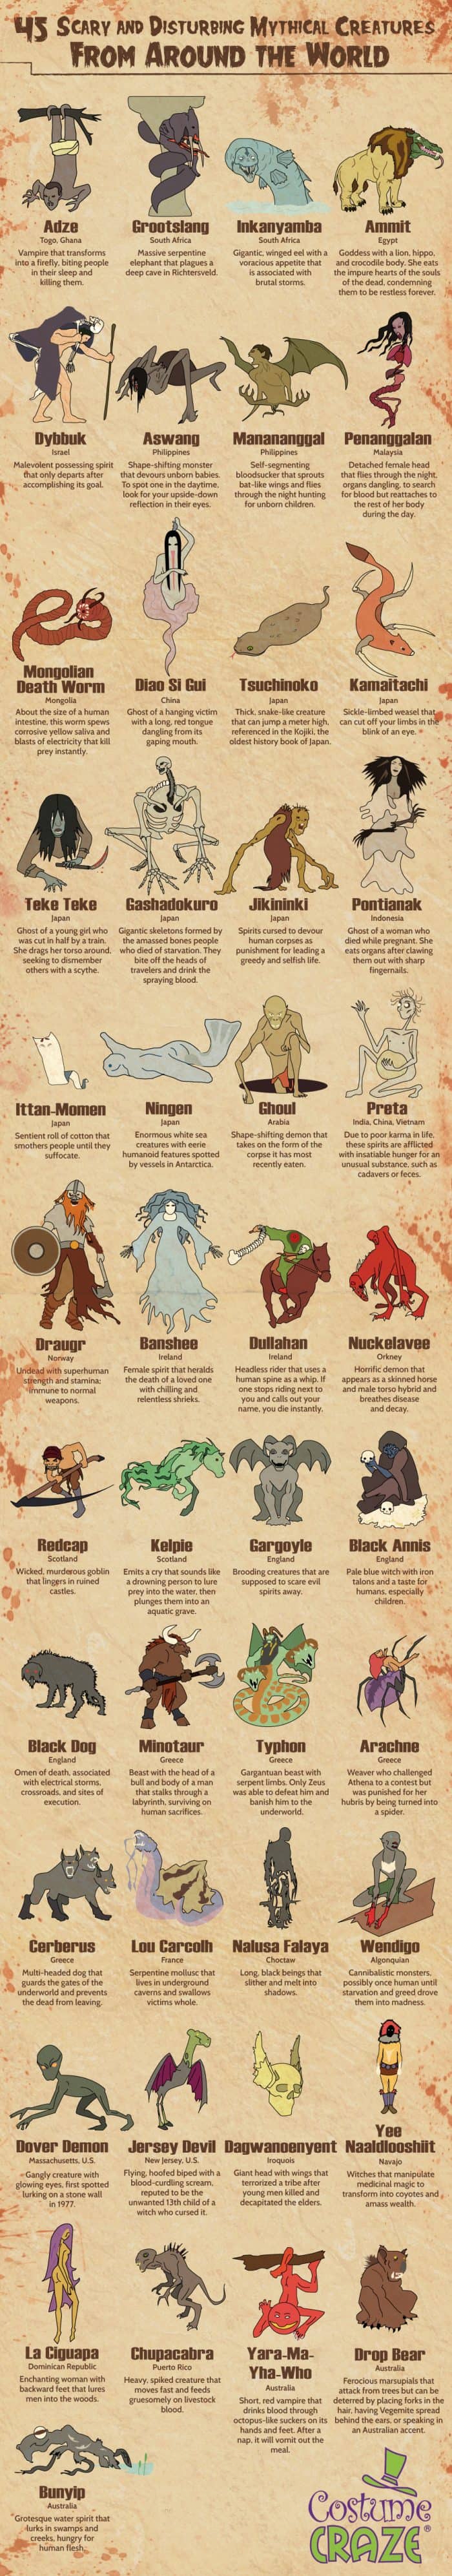 45 disturbing mythical creatures from cultures around the world